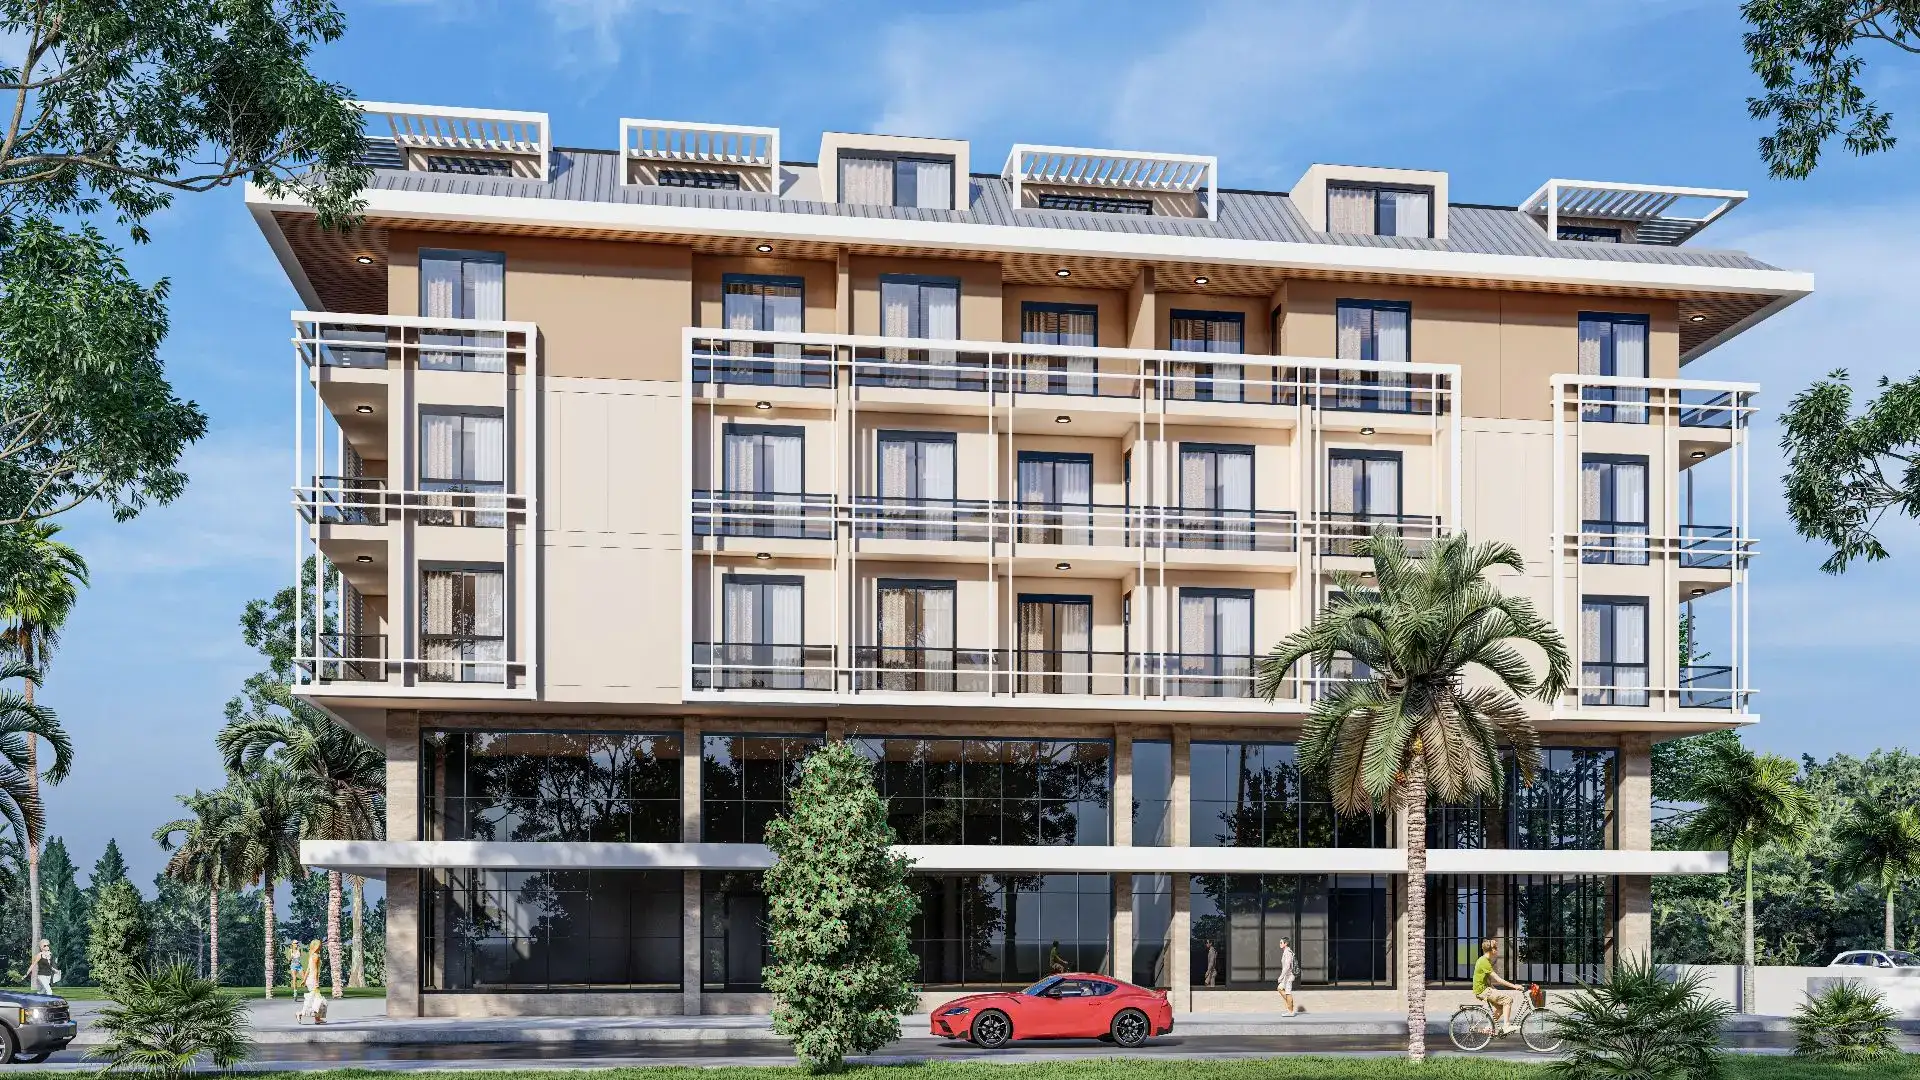 LUXURY CLASS PROJECT IN THE VERY CENTER OF ALANYA 650M FROM THE BEACH 